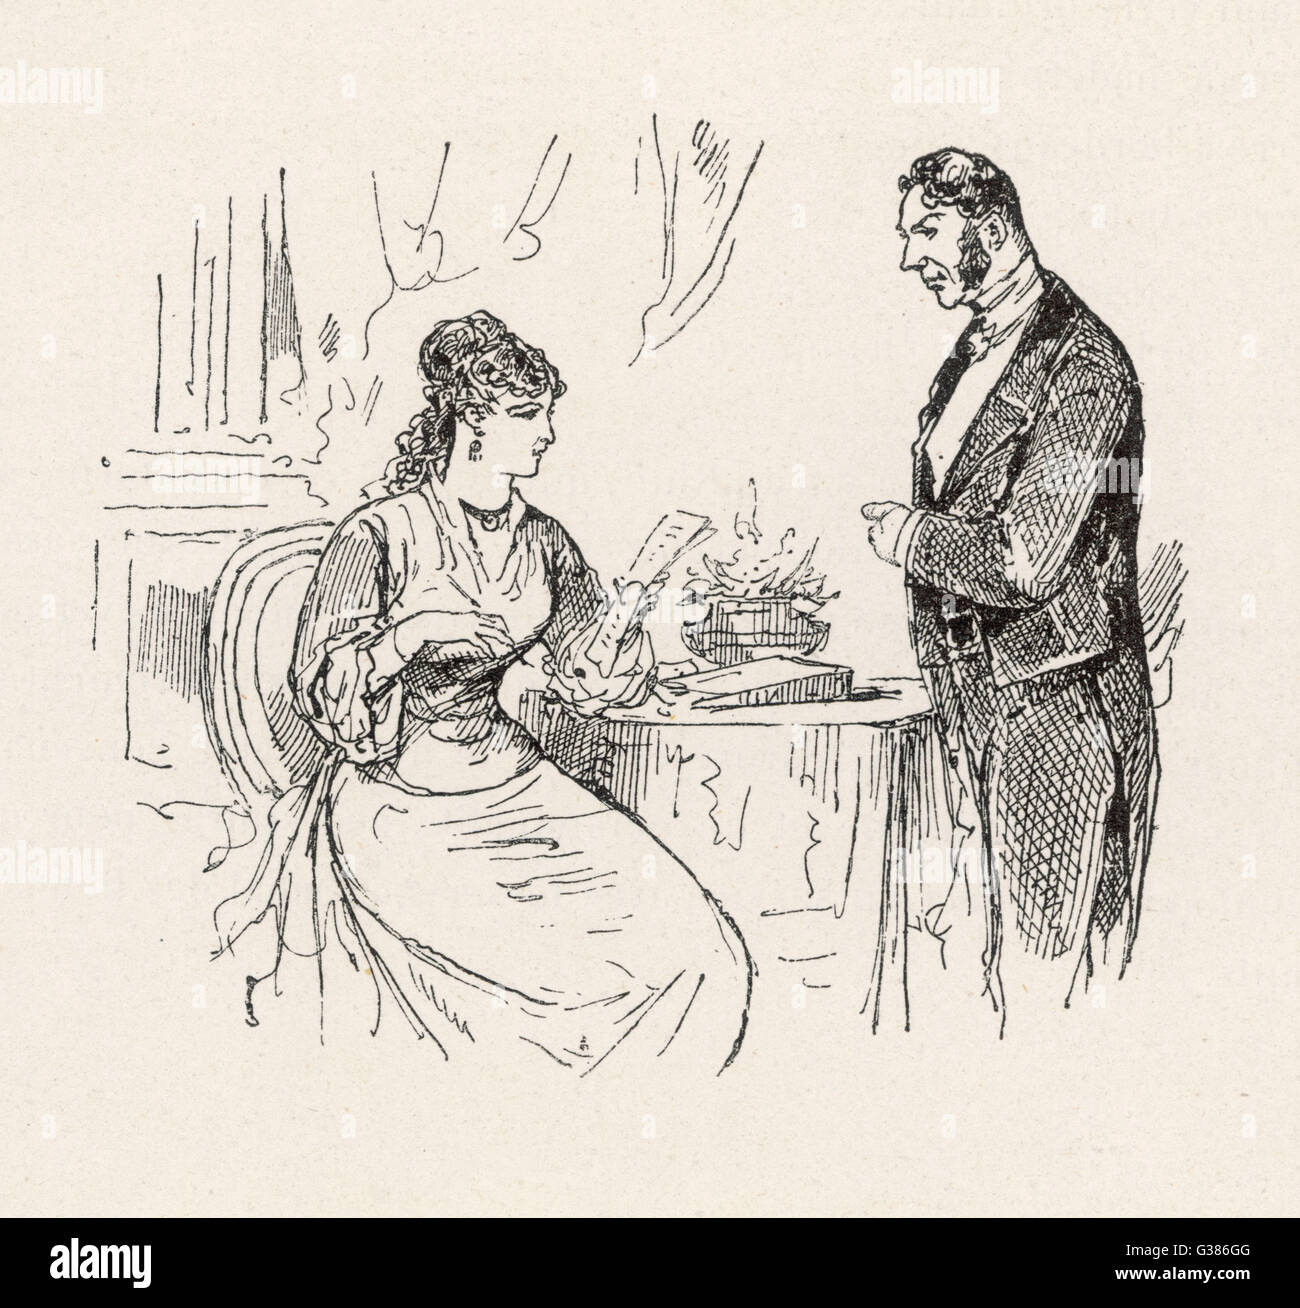 The mistress of the house  discusses the evening's  arrangements with her butler        Date: 1878 Stock Photo